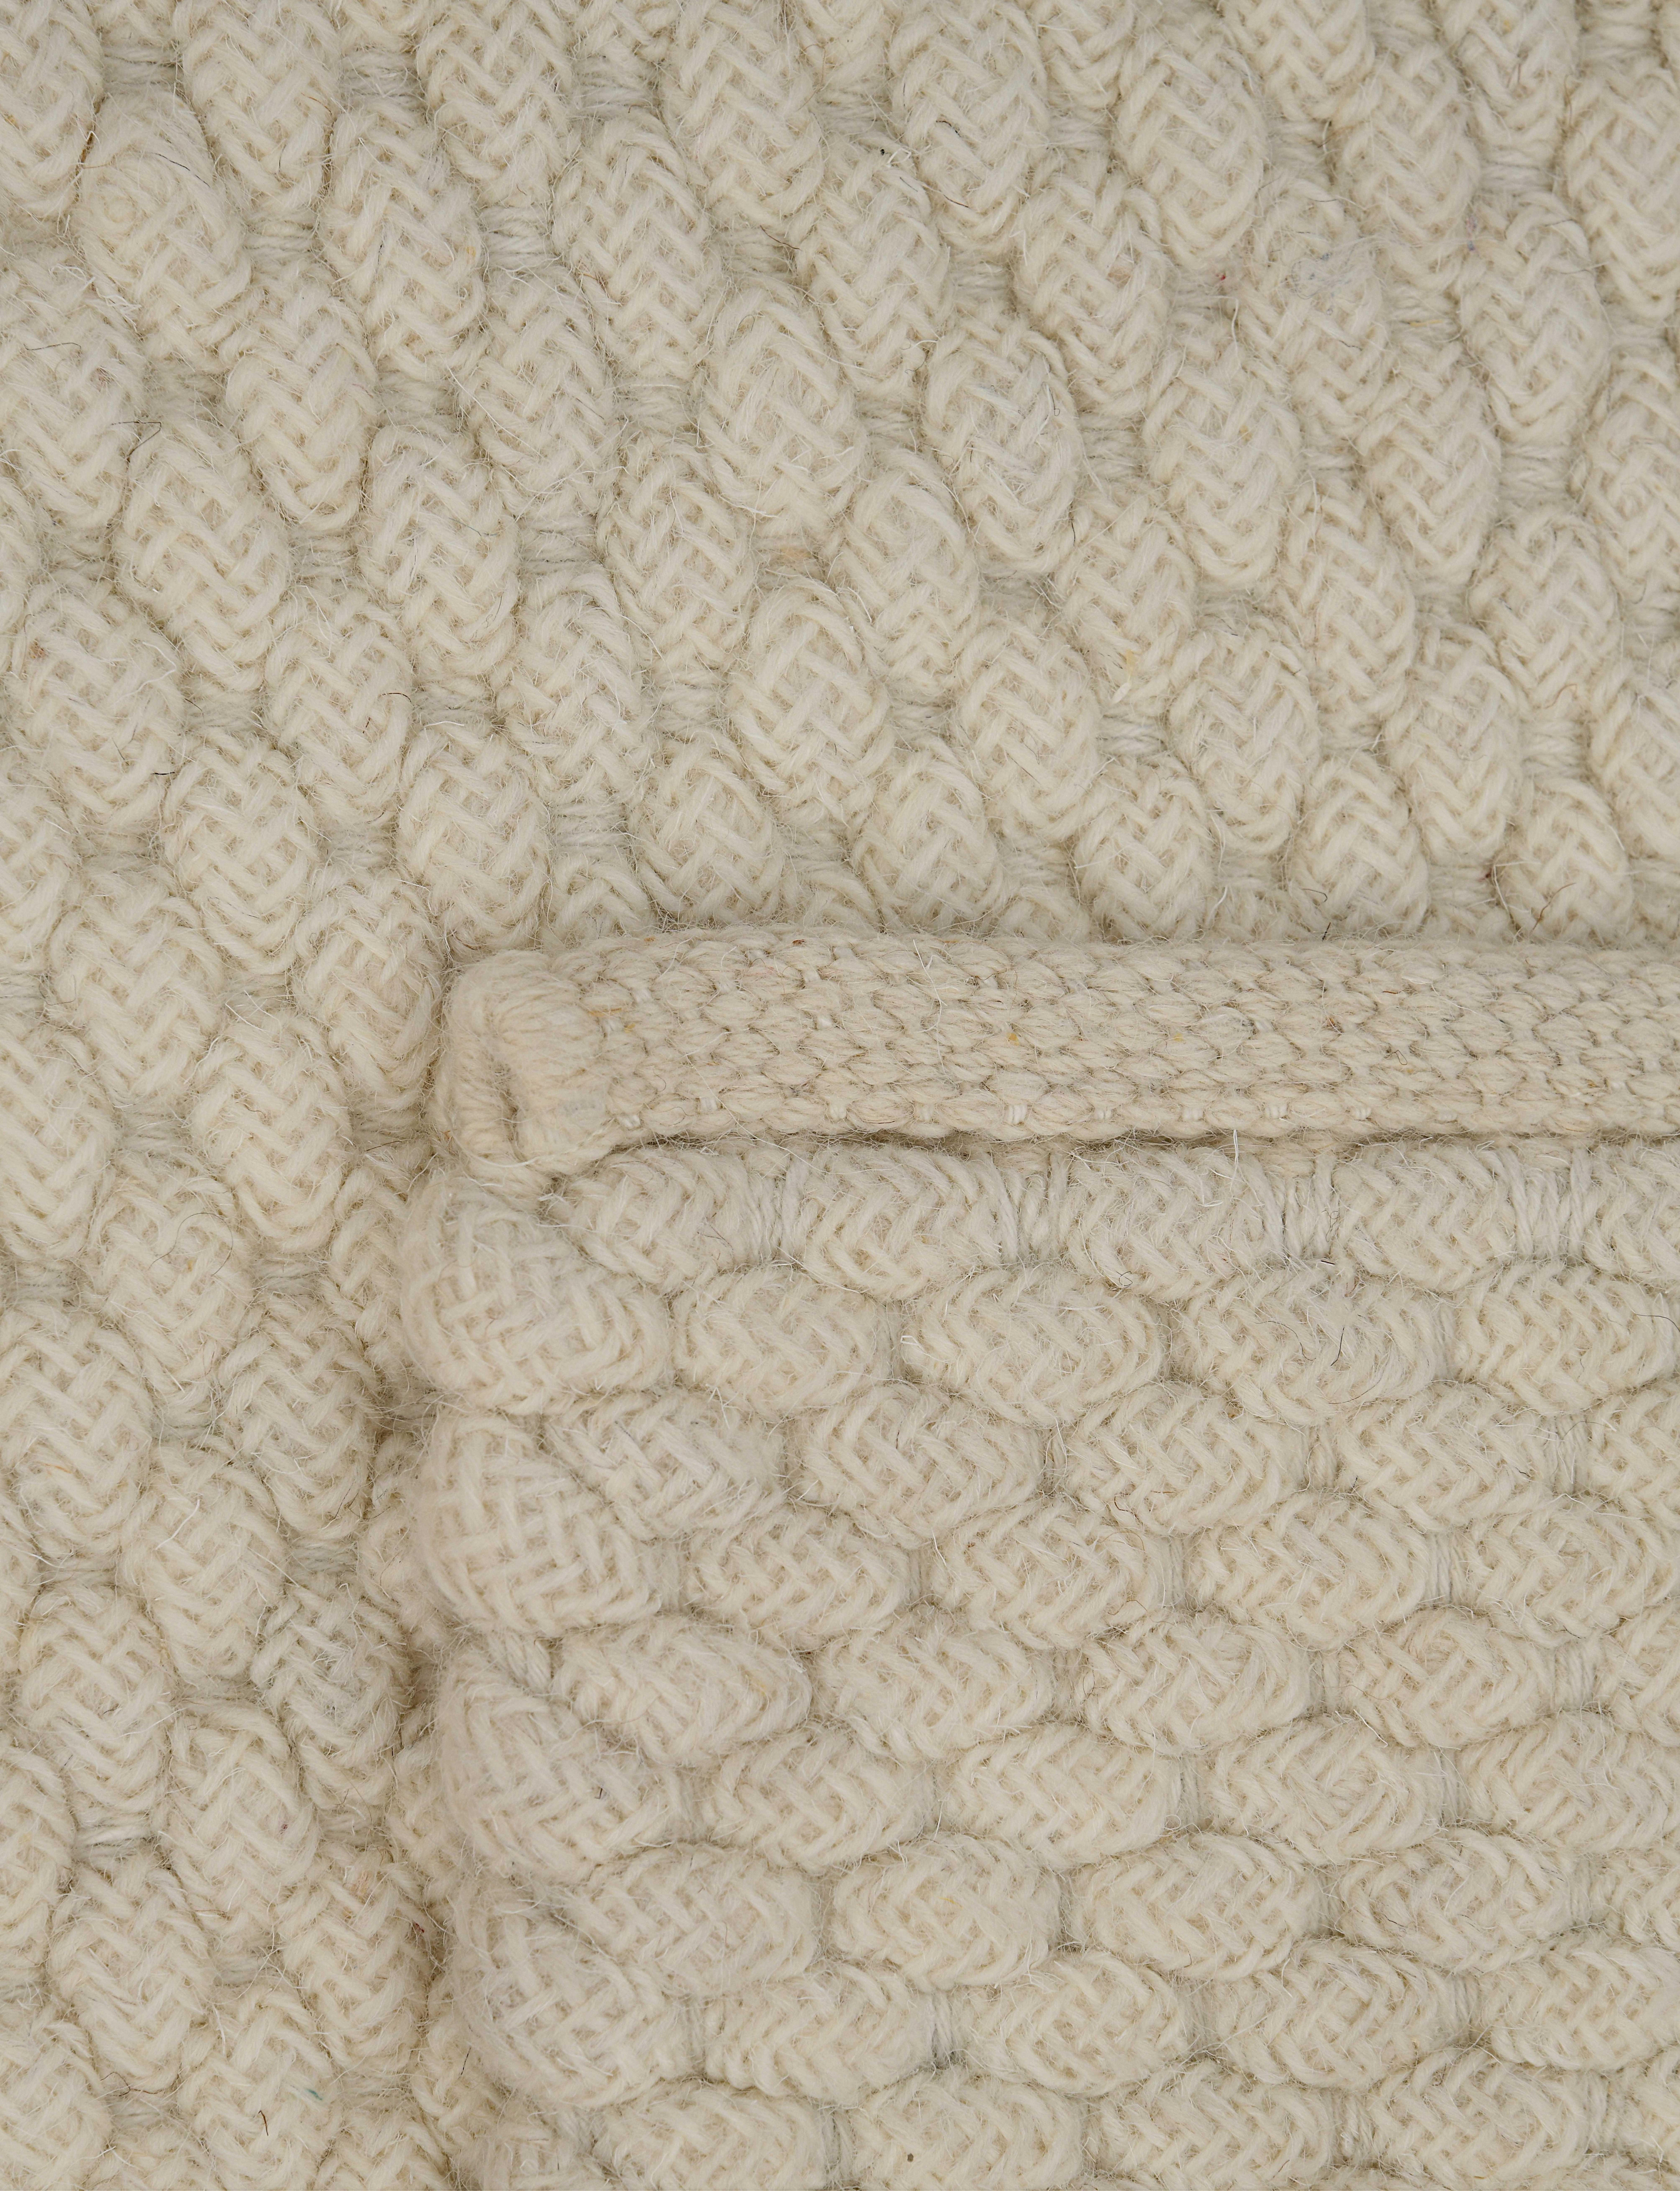 Hand-Woven Acia, Ivory, Handwoven Face: 60% Undyed NZ Wool, 40% Undyed MED Wool, 6' x 9' For Sale